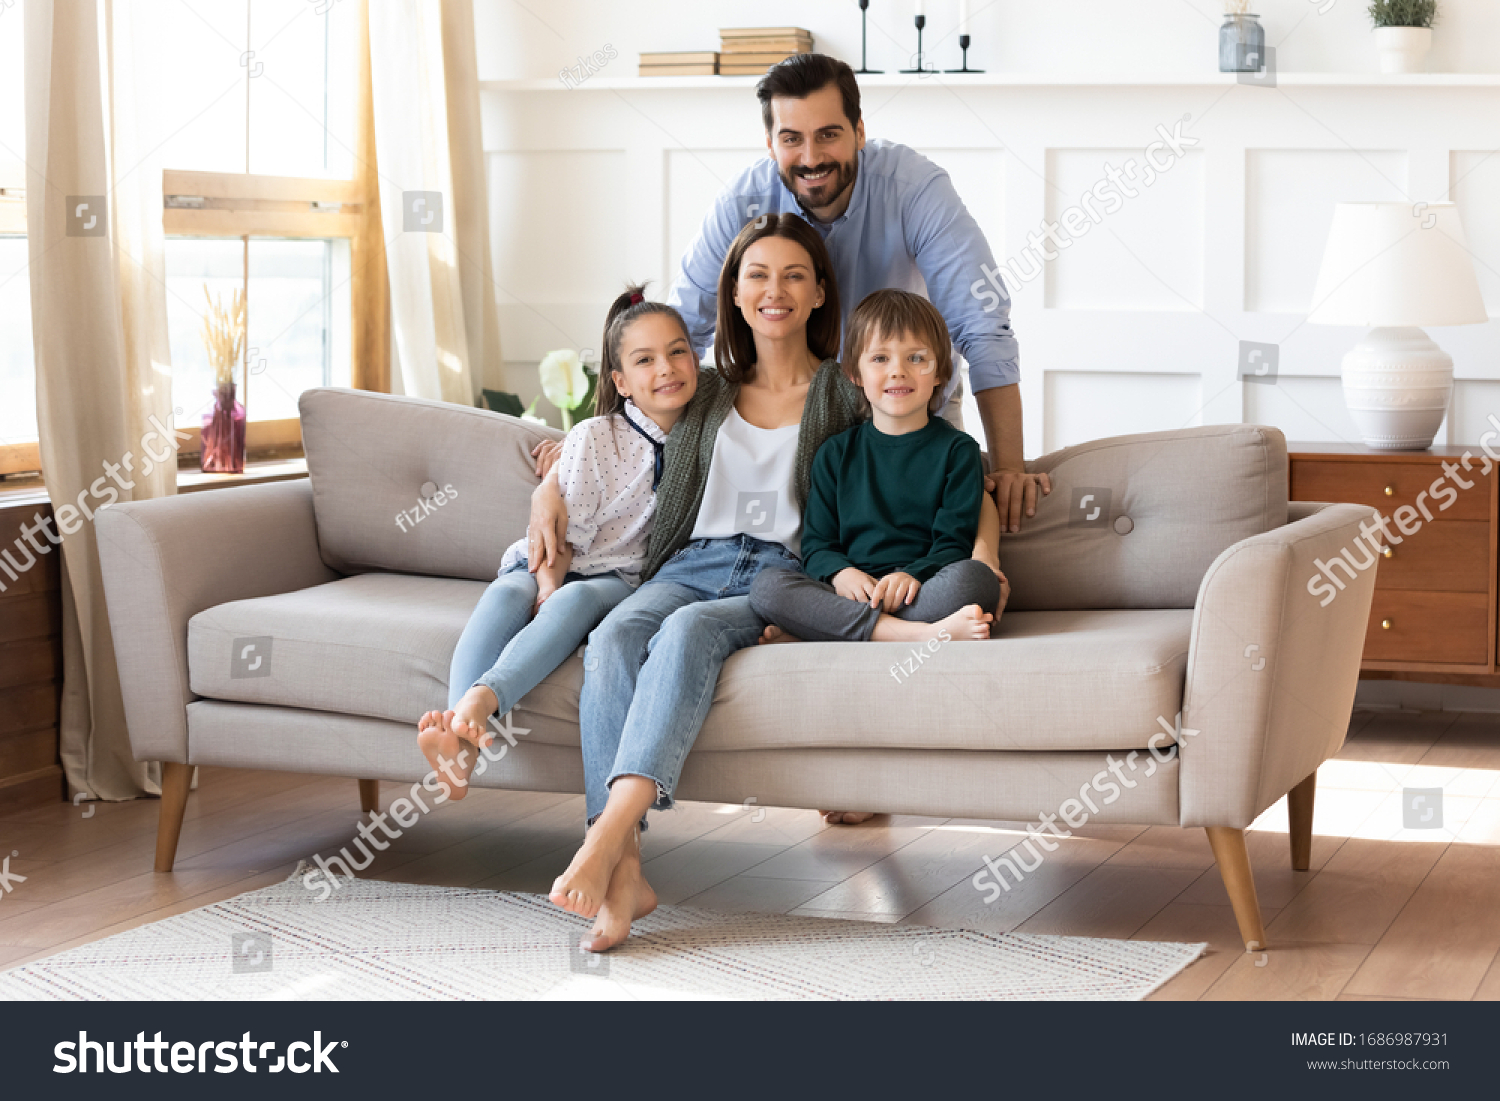 Portrait of smiling bearded father standing near couch with sitting happy wife and little children. Joyful affectionate family of four posing for photo, looking at camera, good relations concept. #1686987931